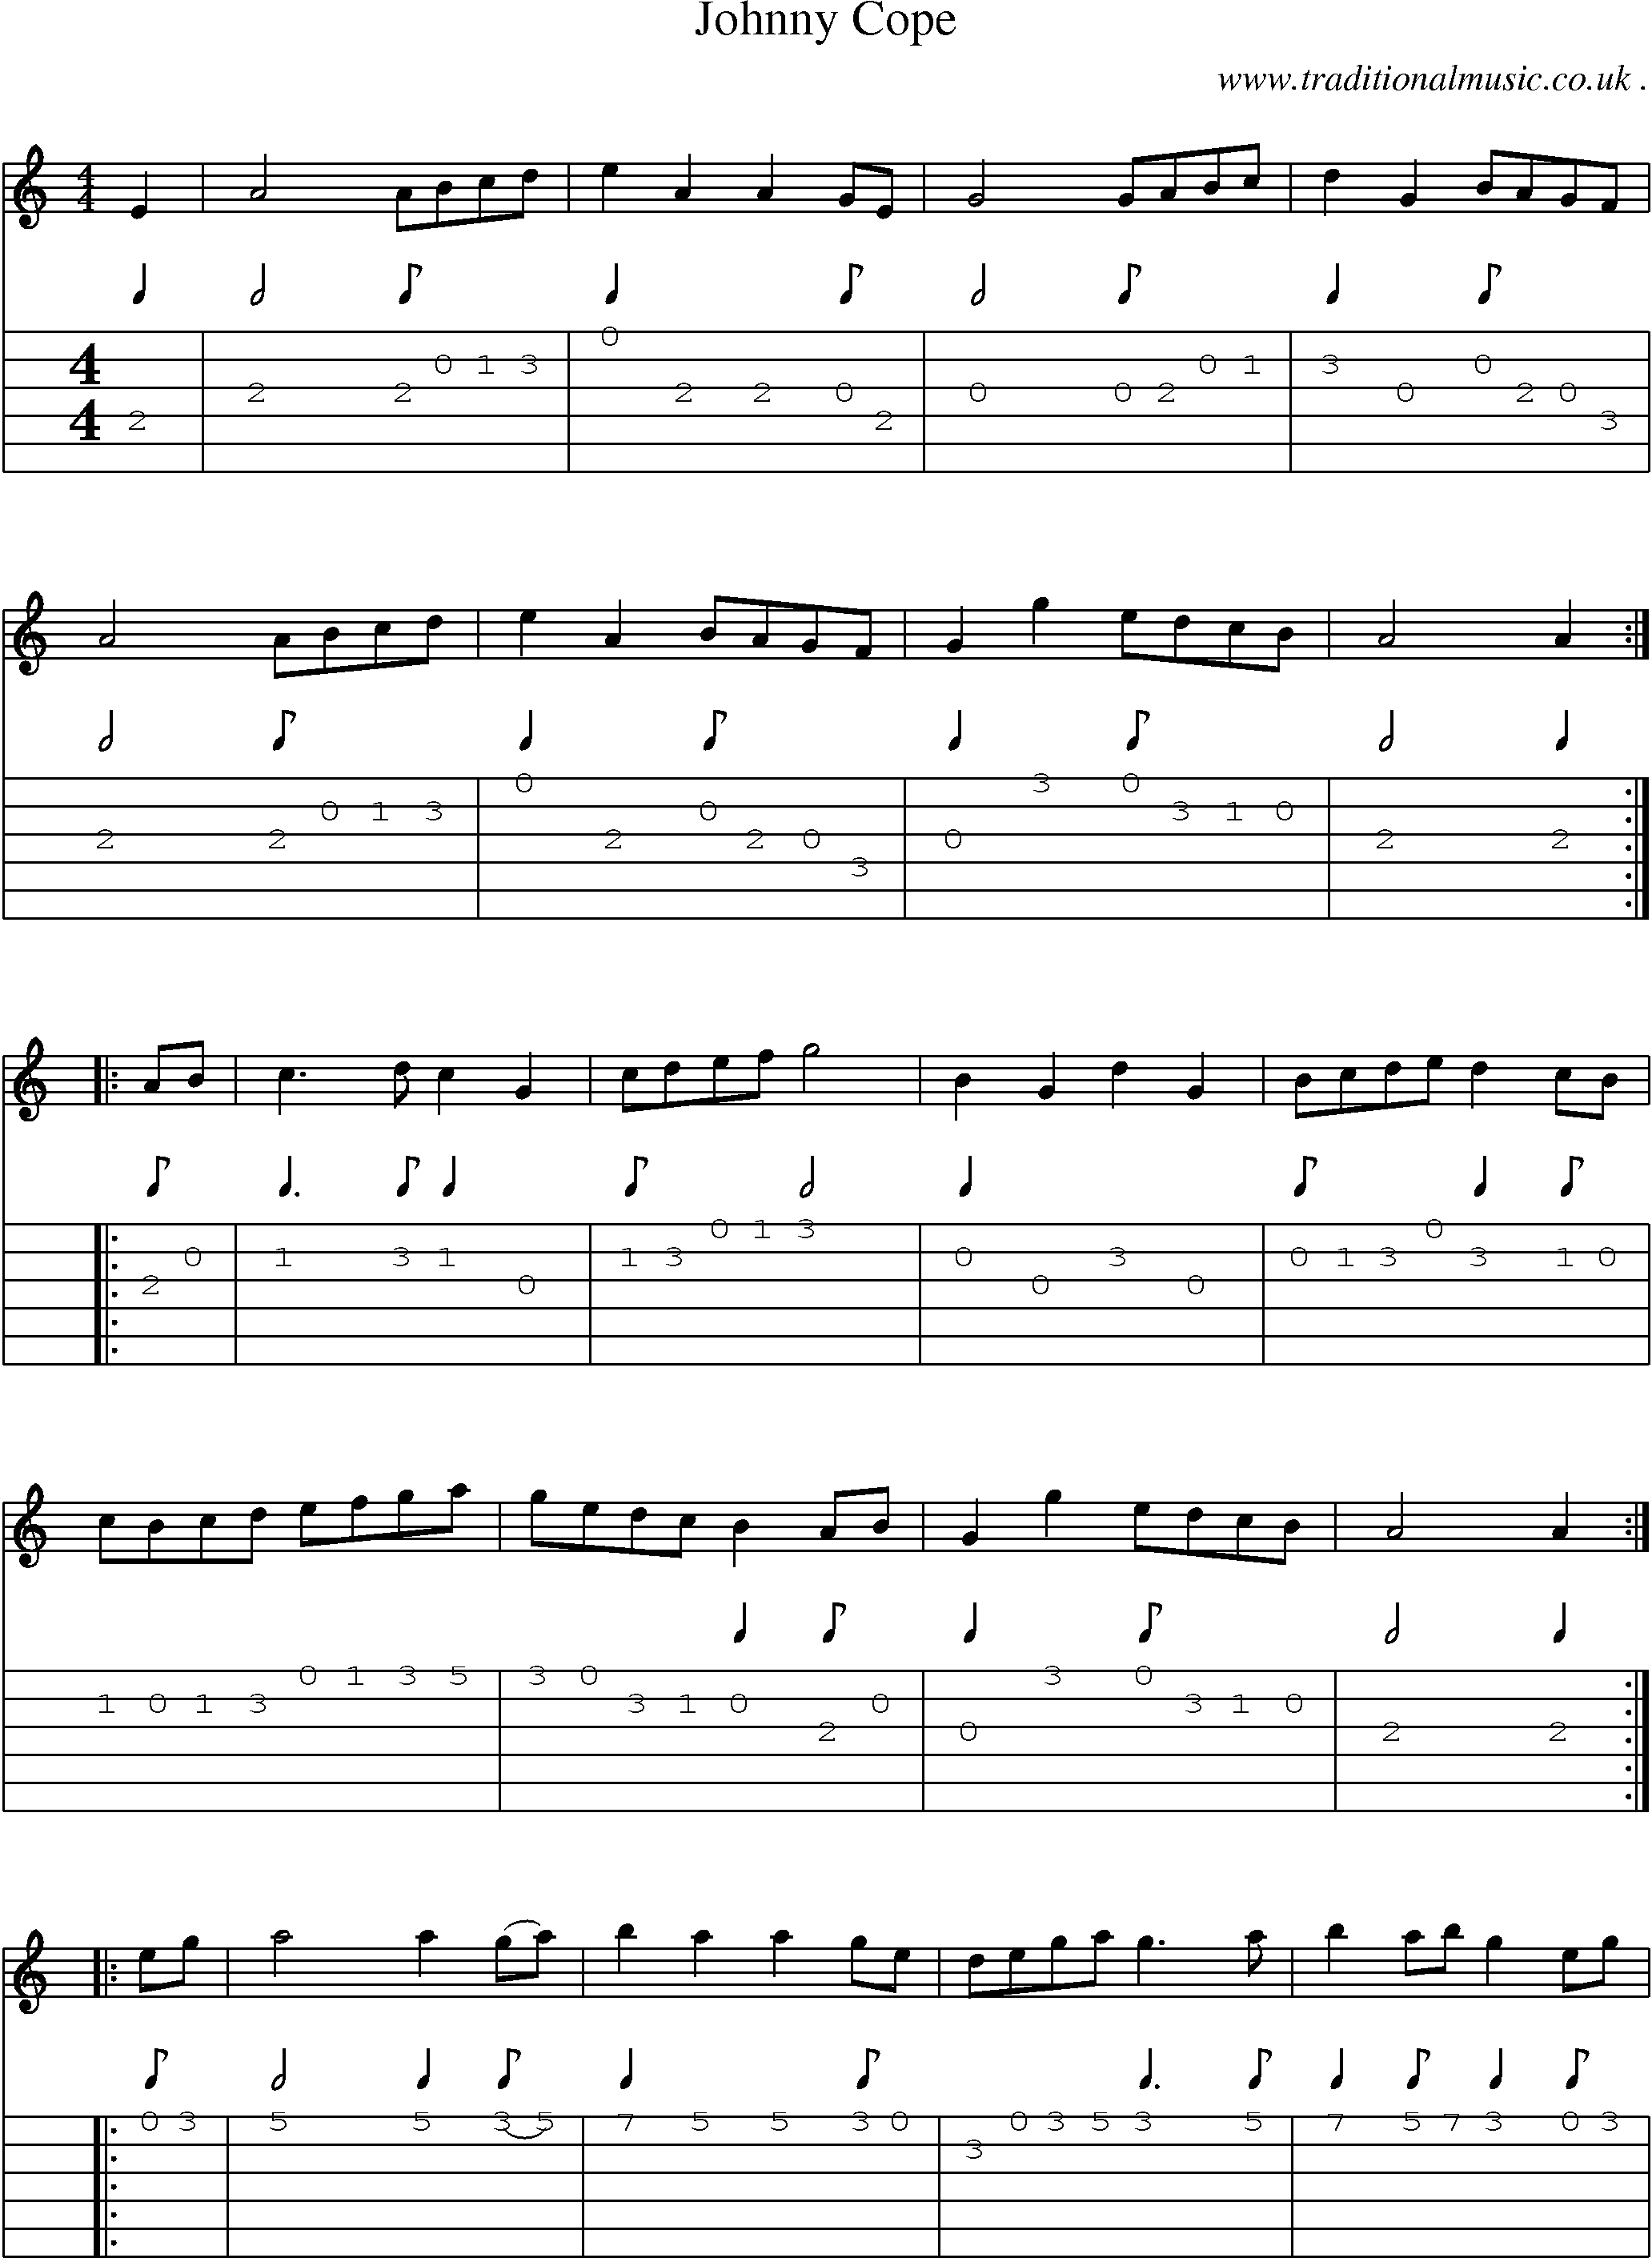 Sheet-Music and Guitar Tabs for Johnny Cope